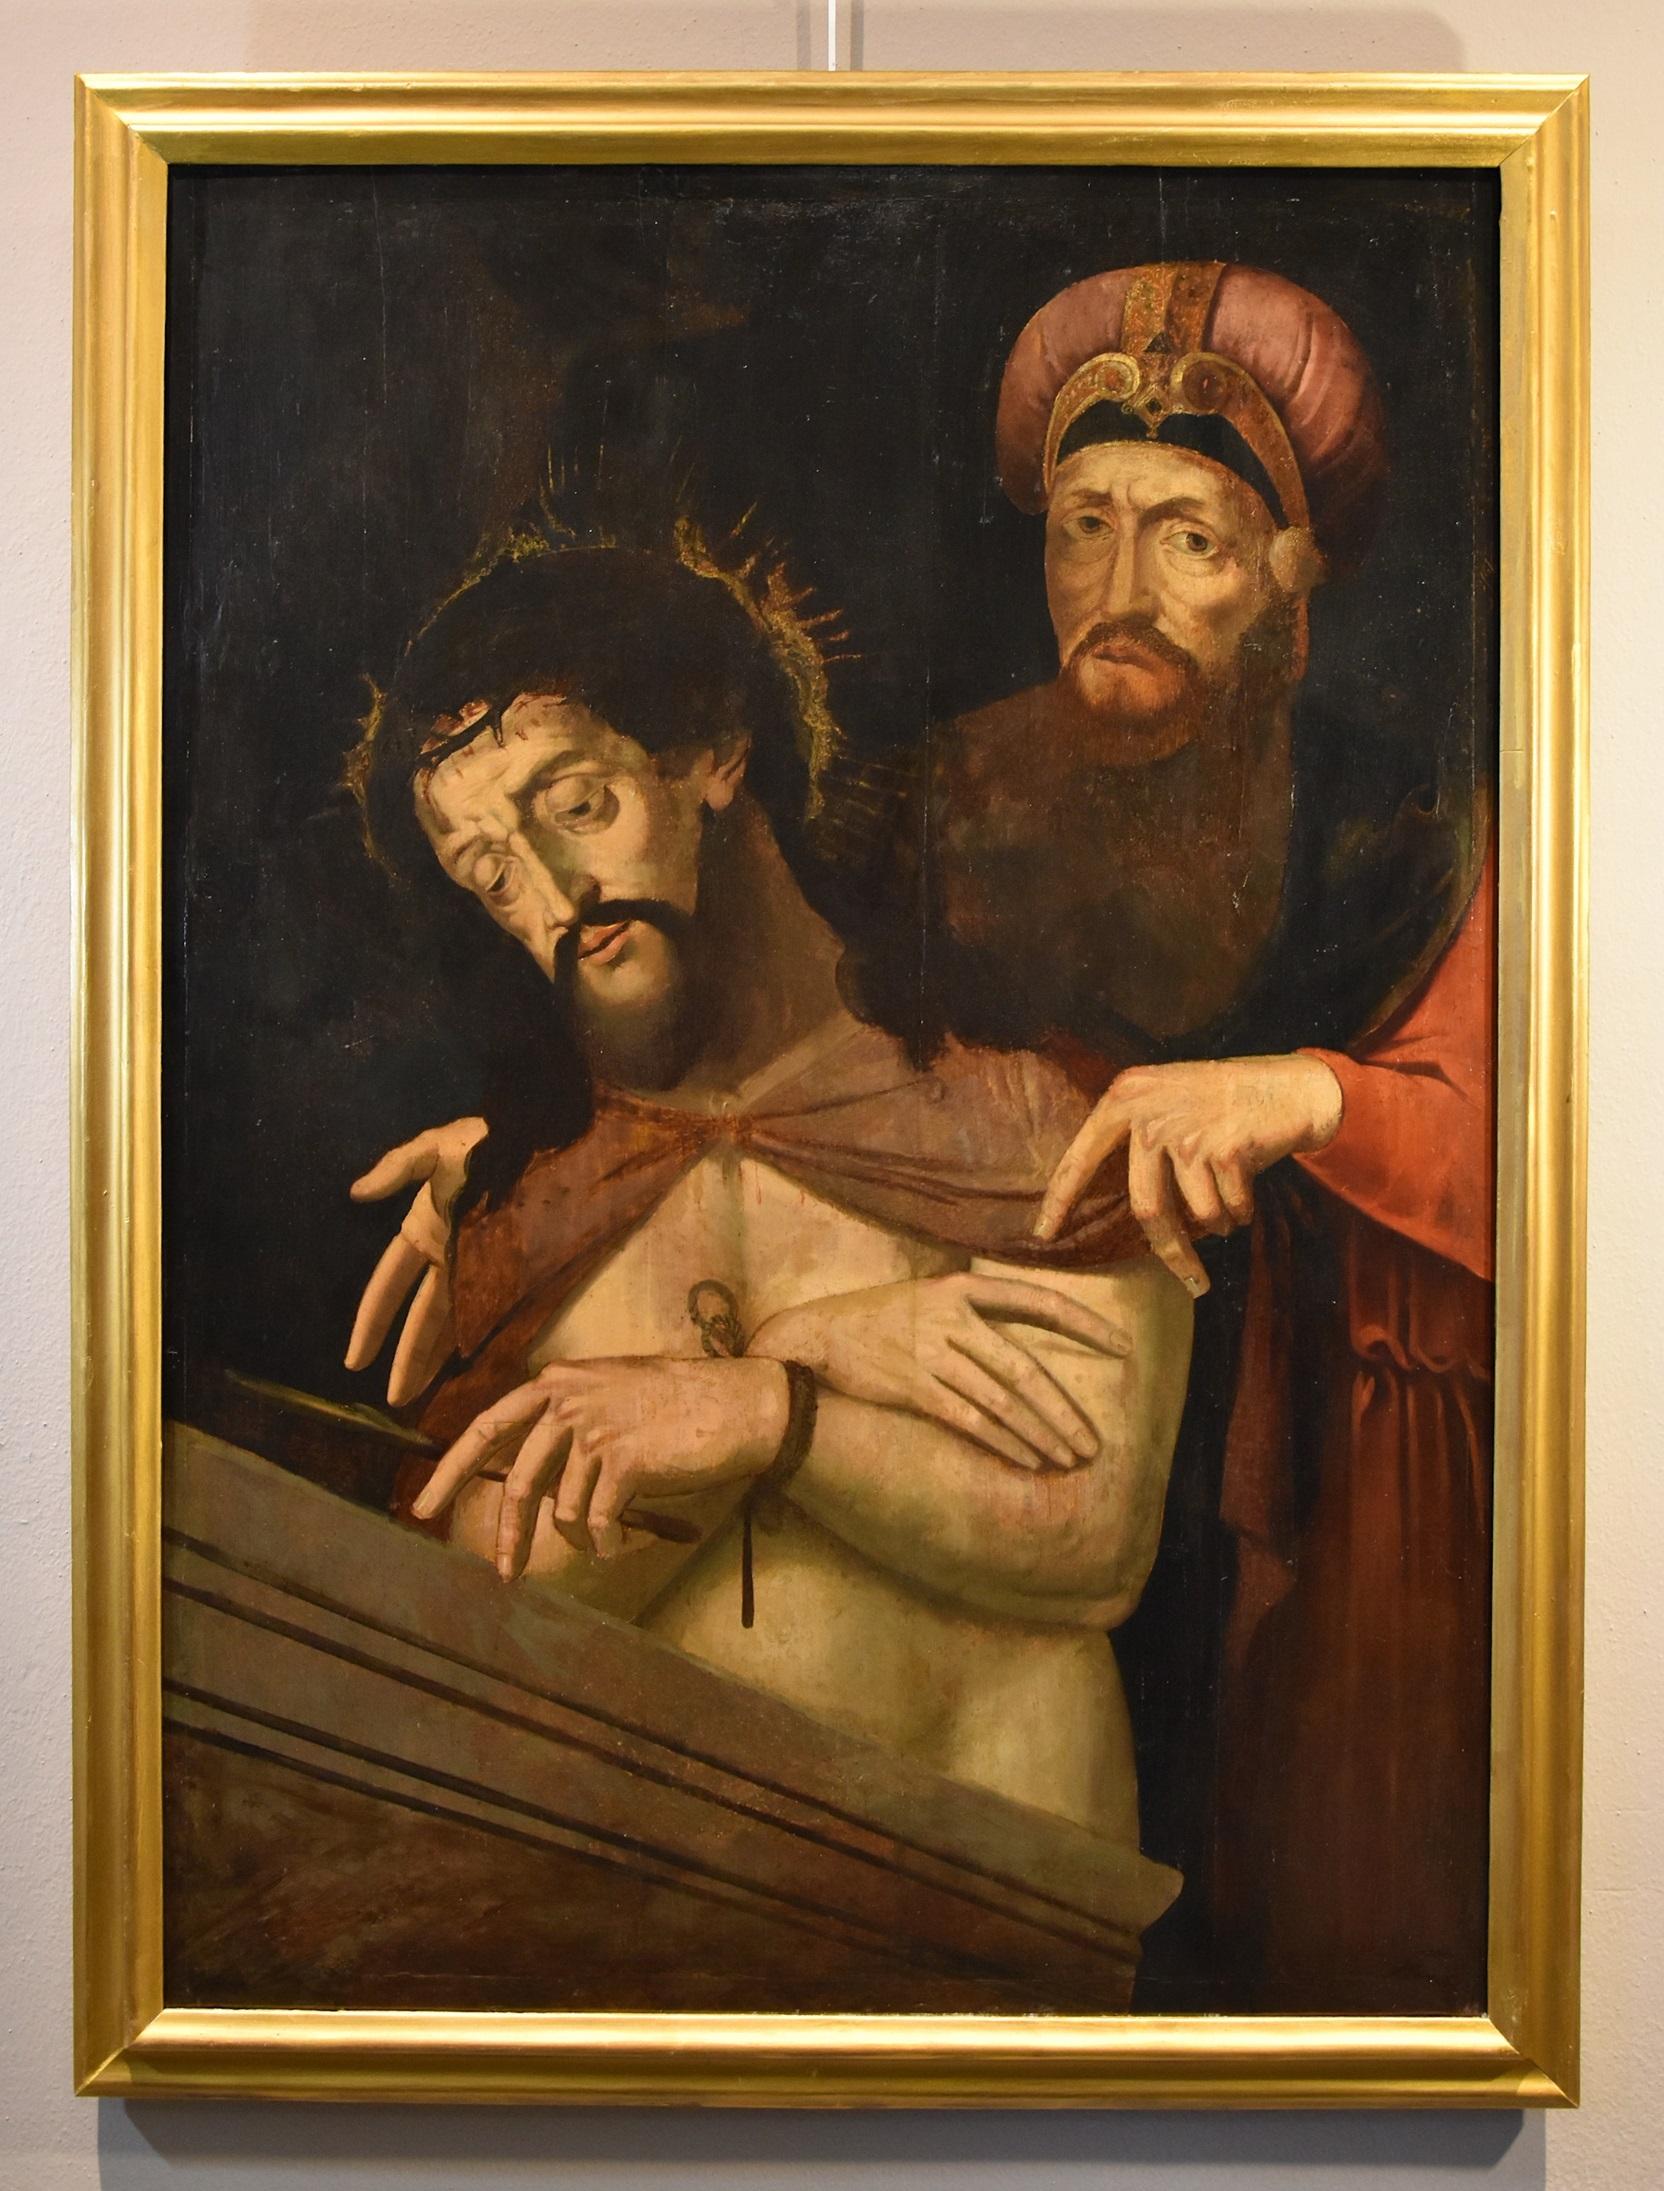 Ecce Homo Coxie Paint 16/17th Century Paint Oil on table Old master Flemish Art